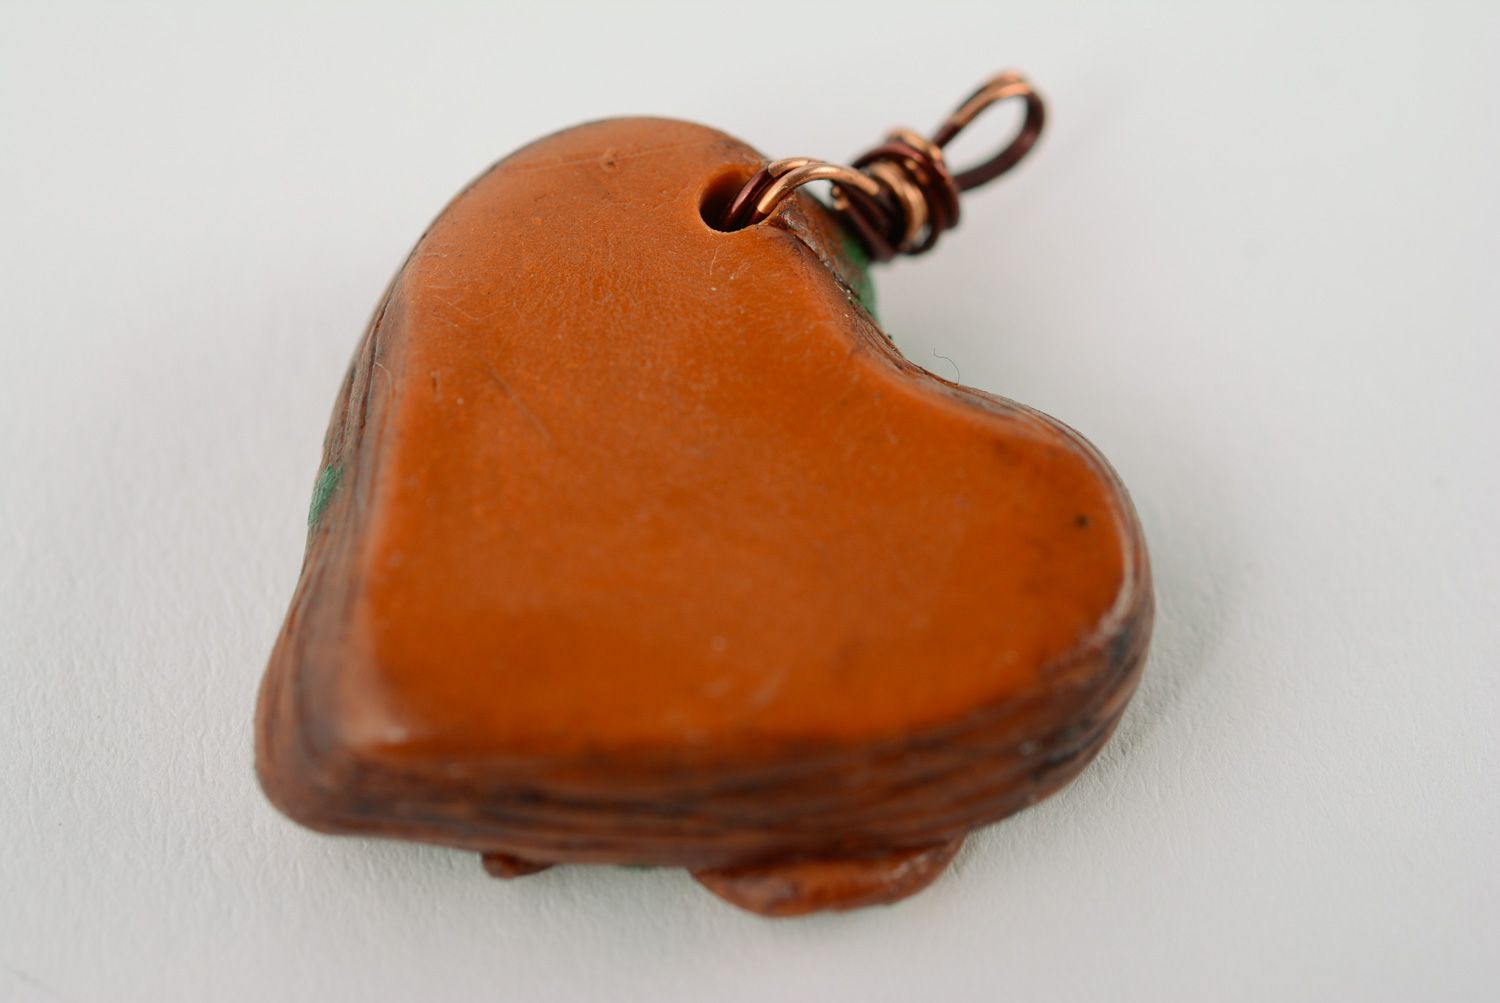 Homemade heart-shaped pendant with moss and berries inside coated with epoxy photo 3